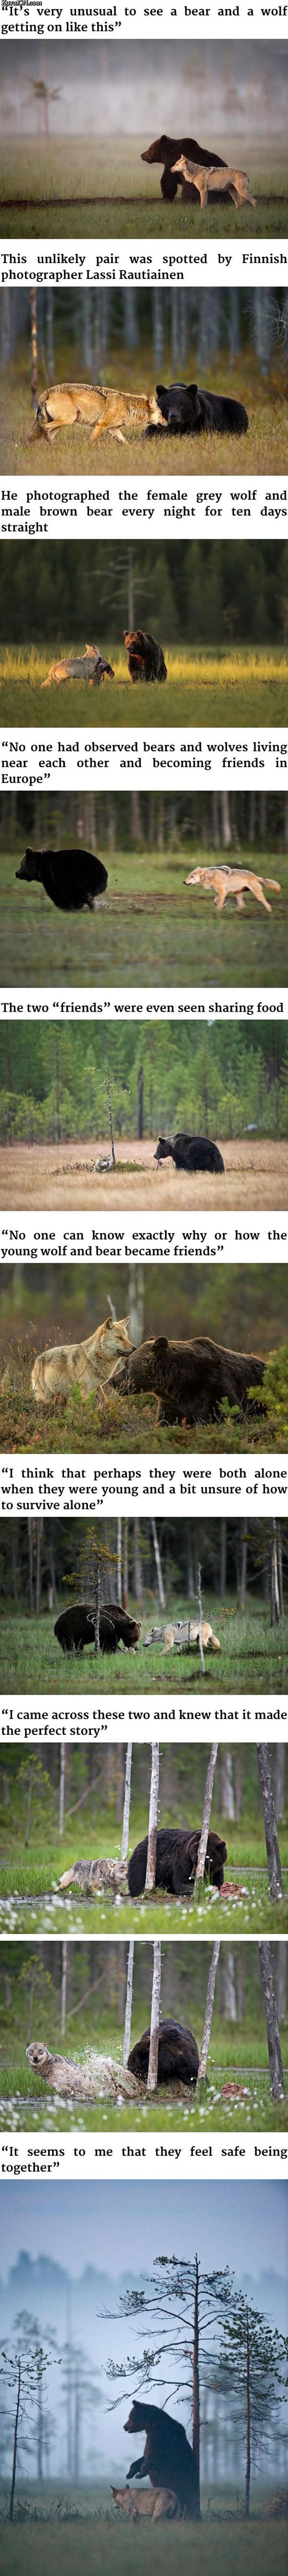 unusual_friendship_between_wolf_and_bear_documented_by_finnish_photographer.jpg